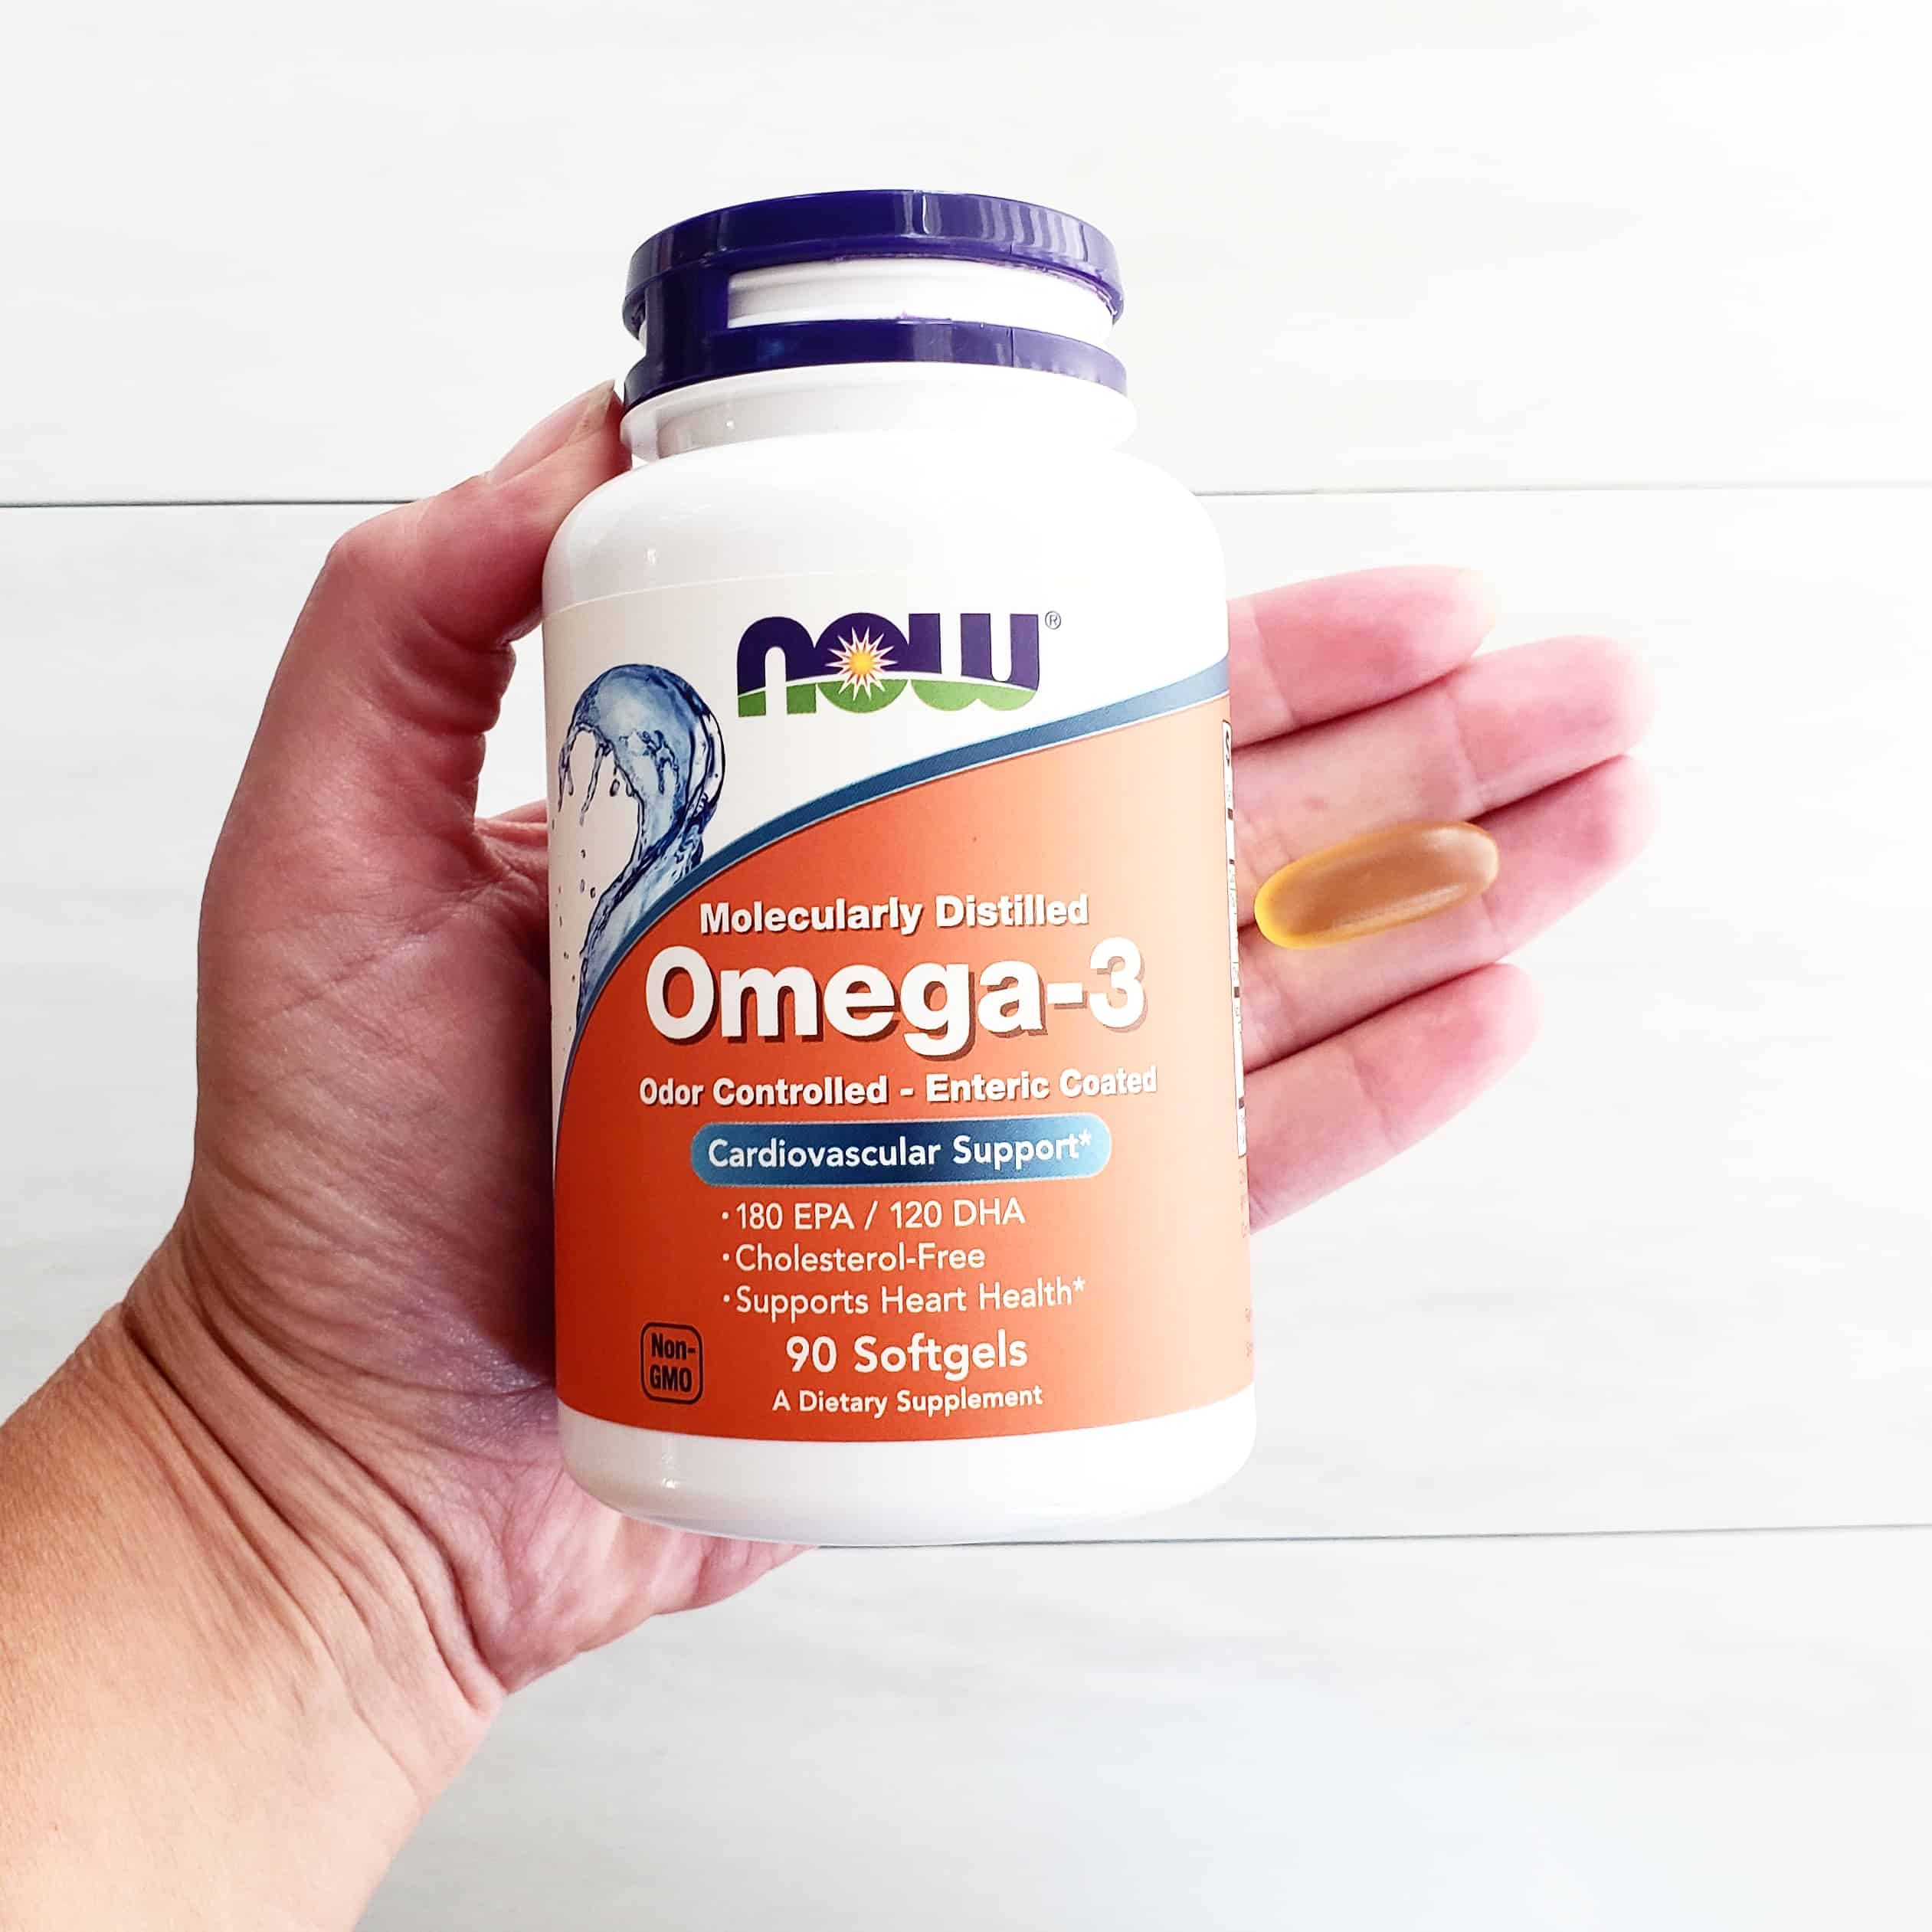 A bottle of omega-3 fatty acids in a woman's hand.